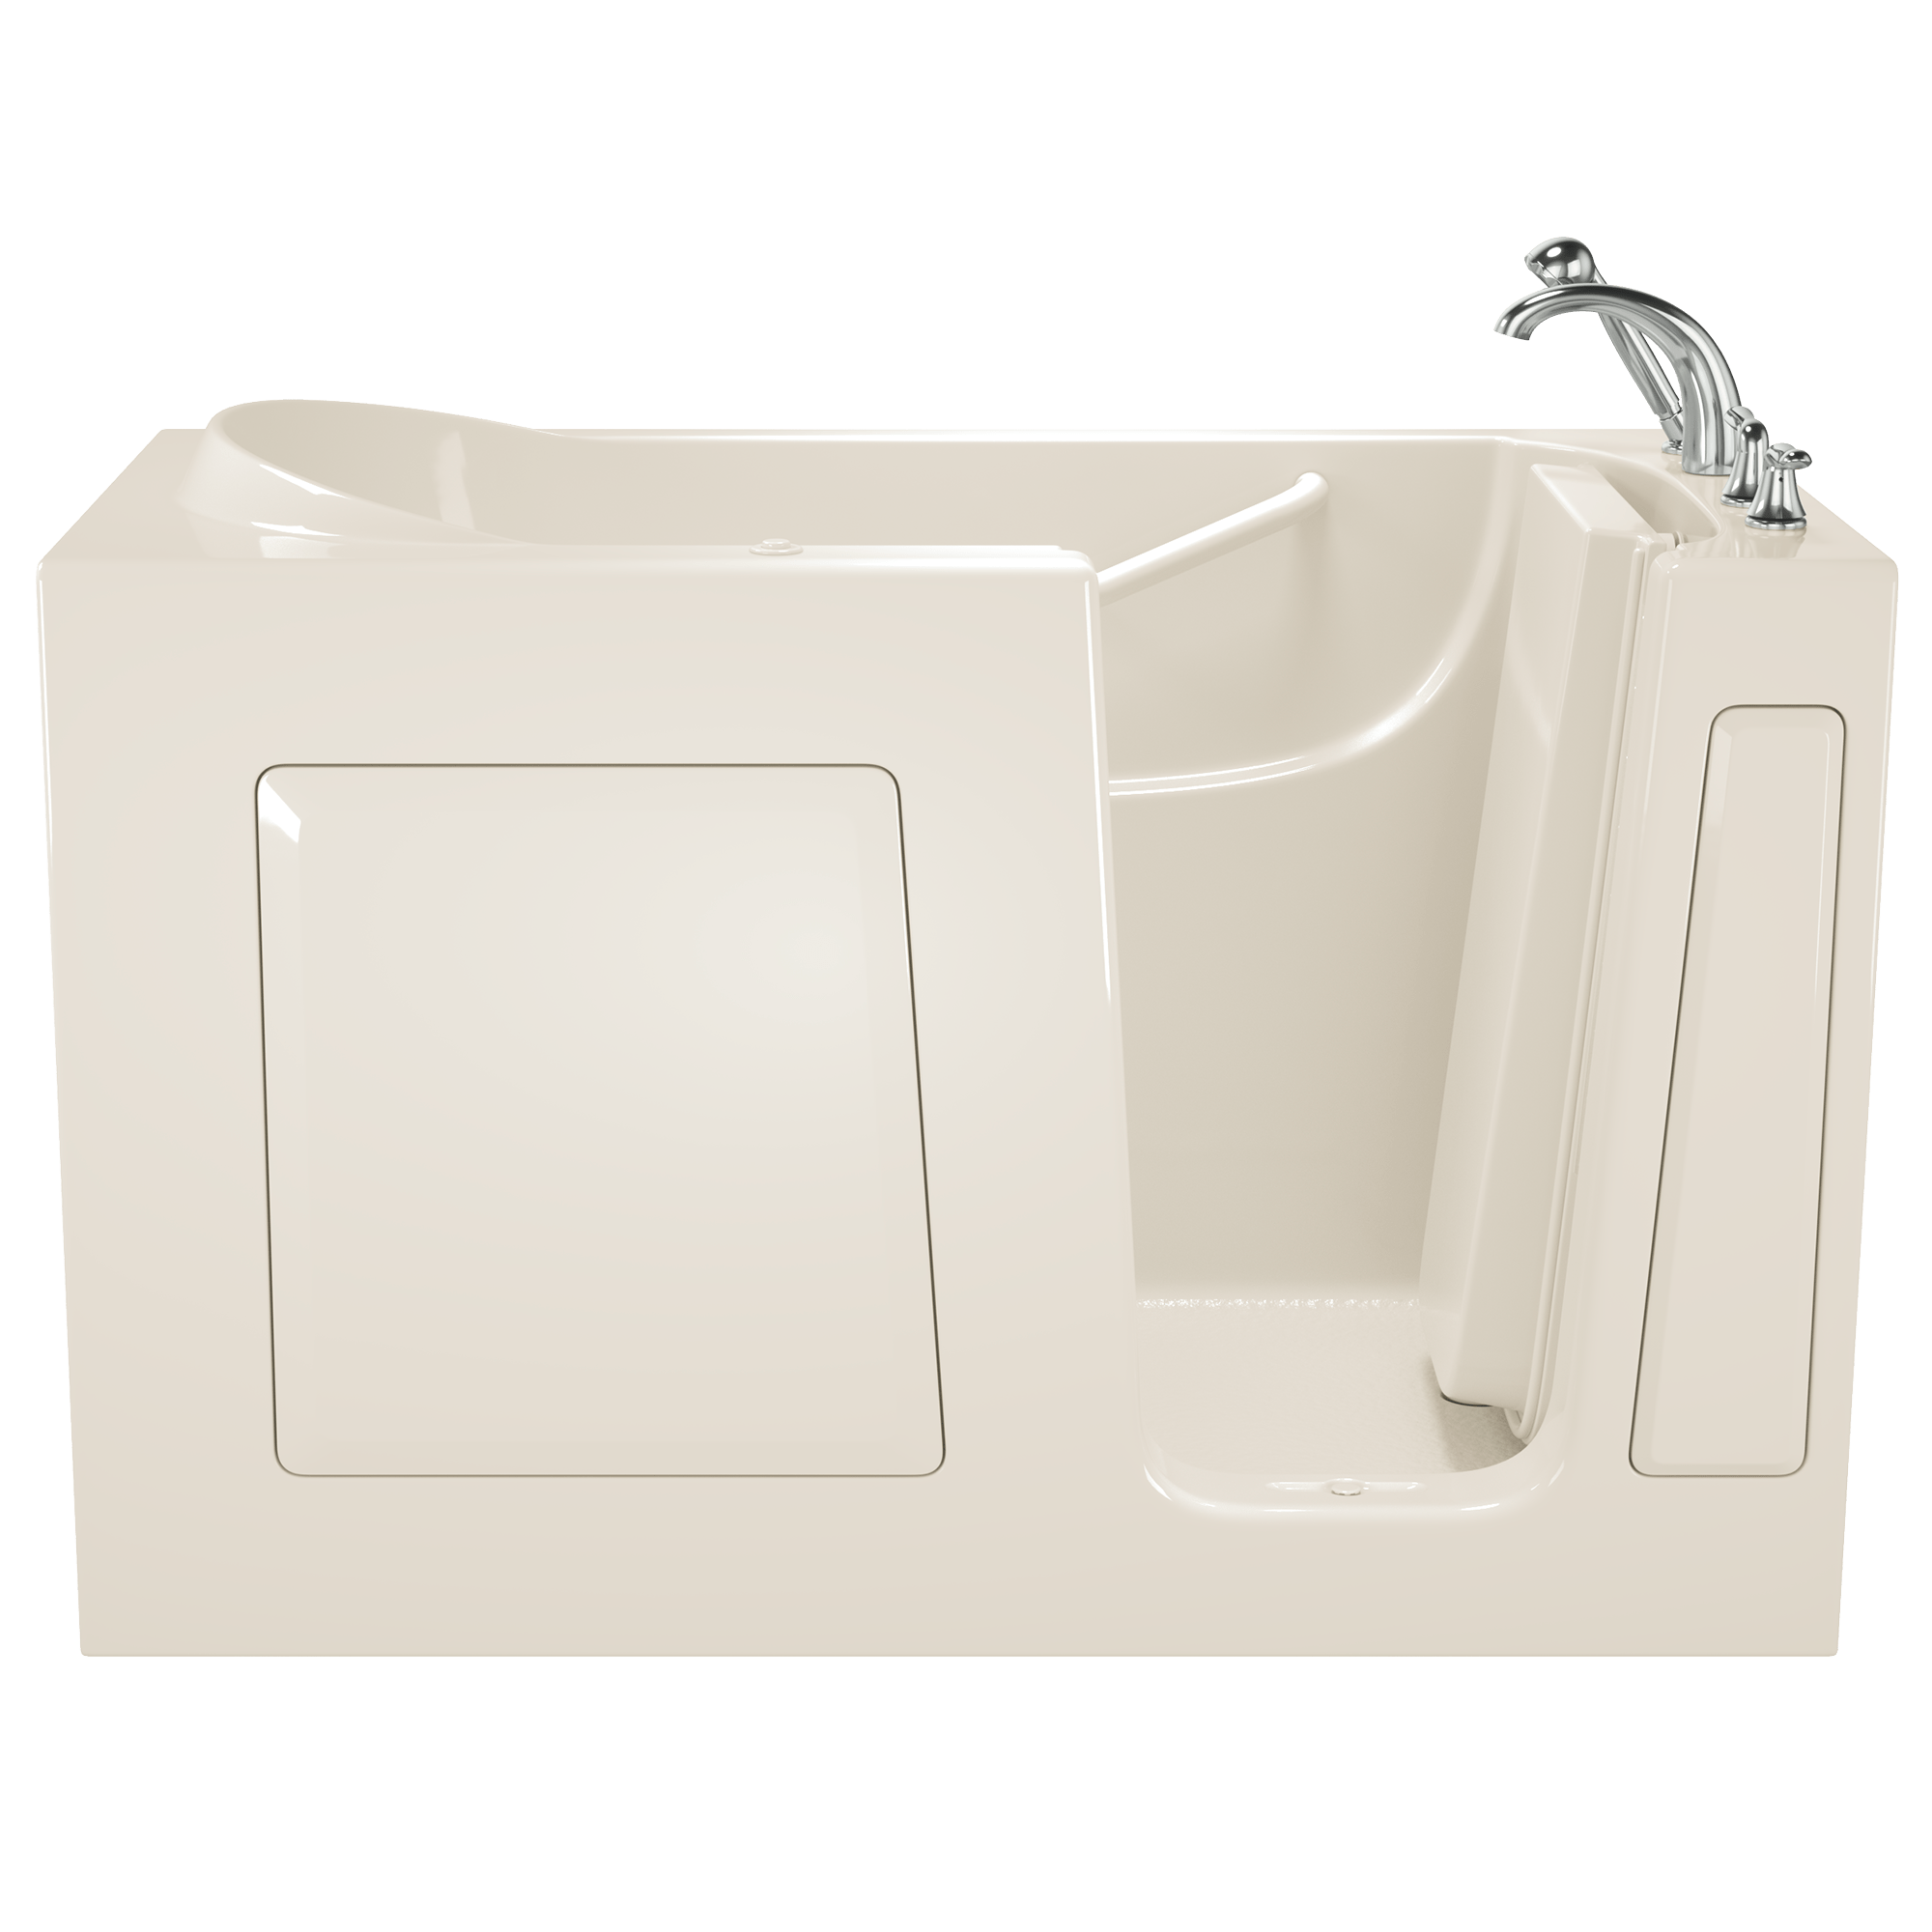 Gelcoat Entry Series 60 x 30-Inch Walk-In Tub With Air Spa System – Right-Hand Drain With Faucet